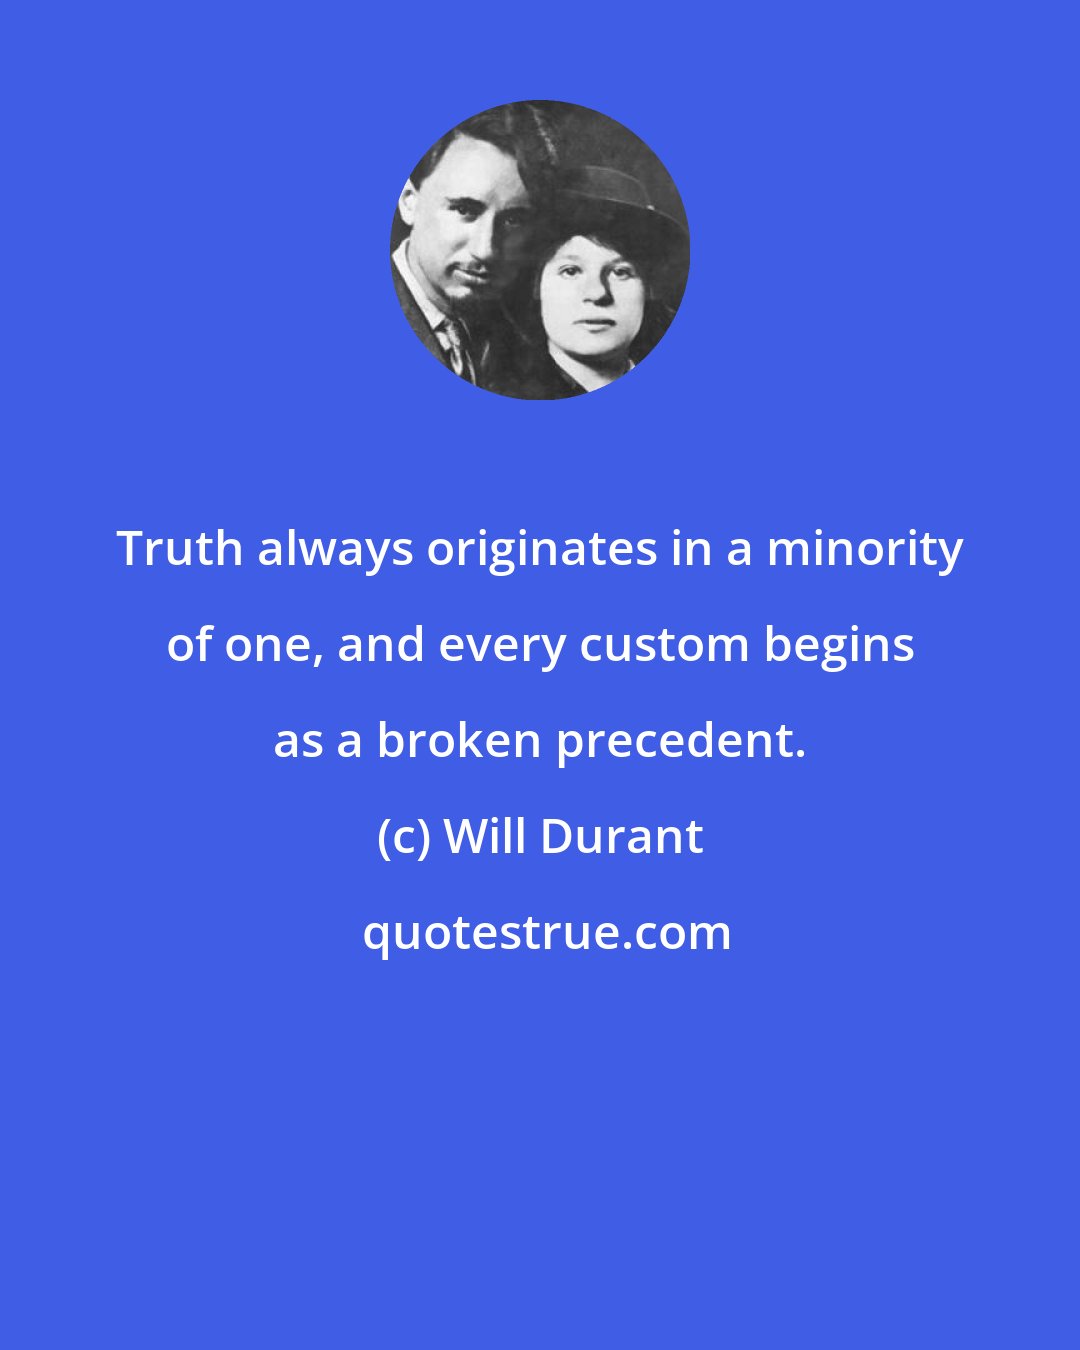 Will Durant: Truth always originates in a minority of one, and every custom begins as a broken precedent.